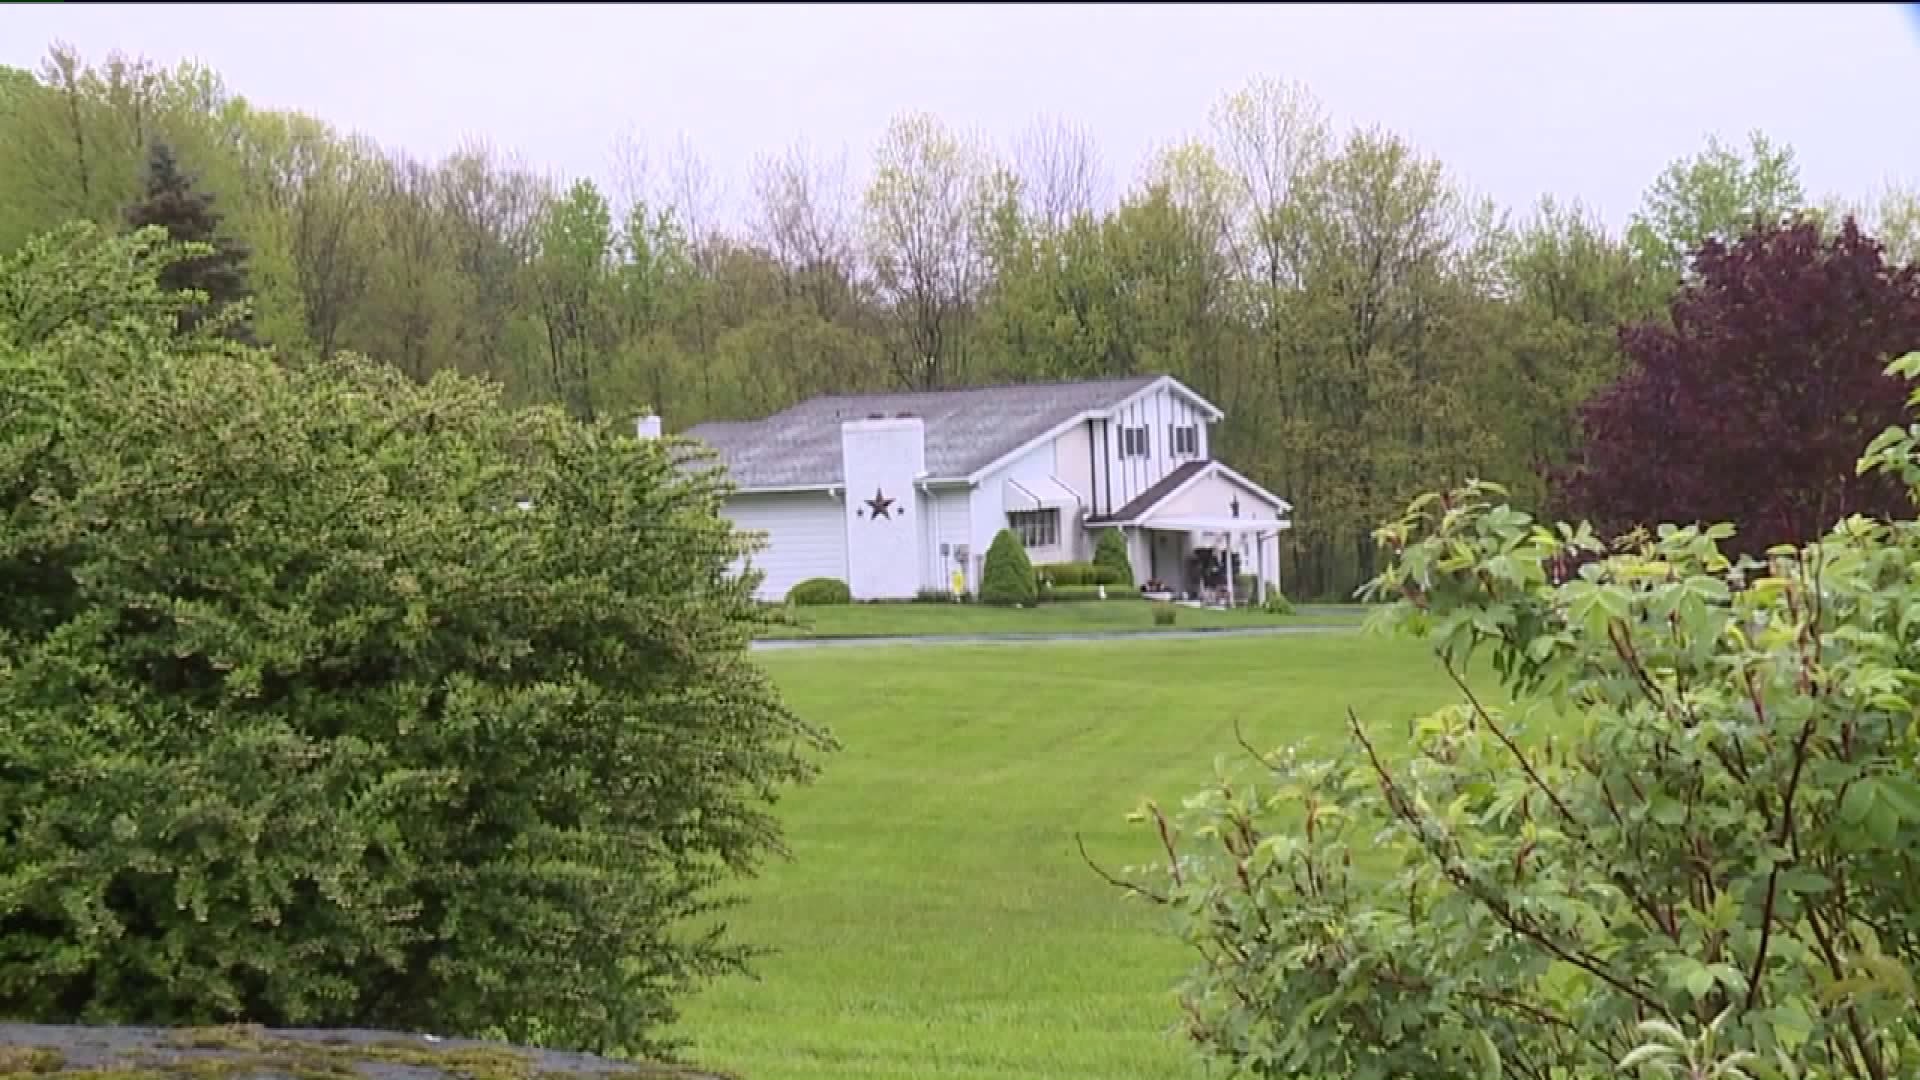 Deaths of Couple in Wyoming County Ruled Murder-Suicide